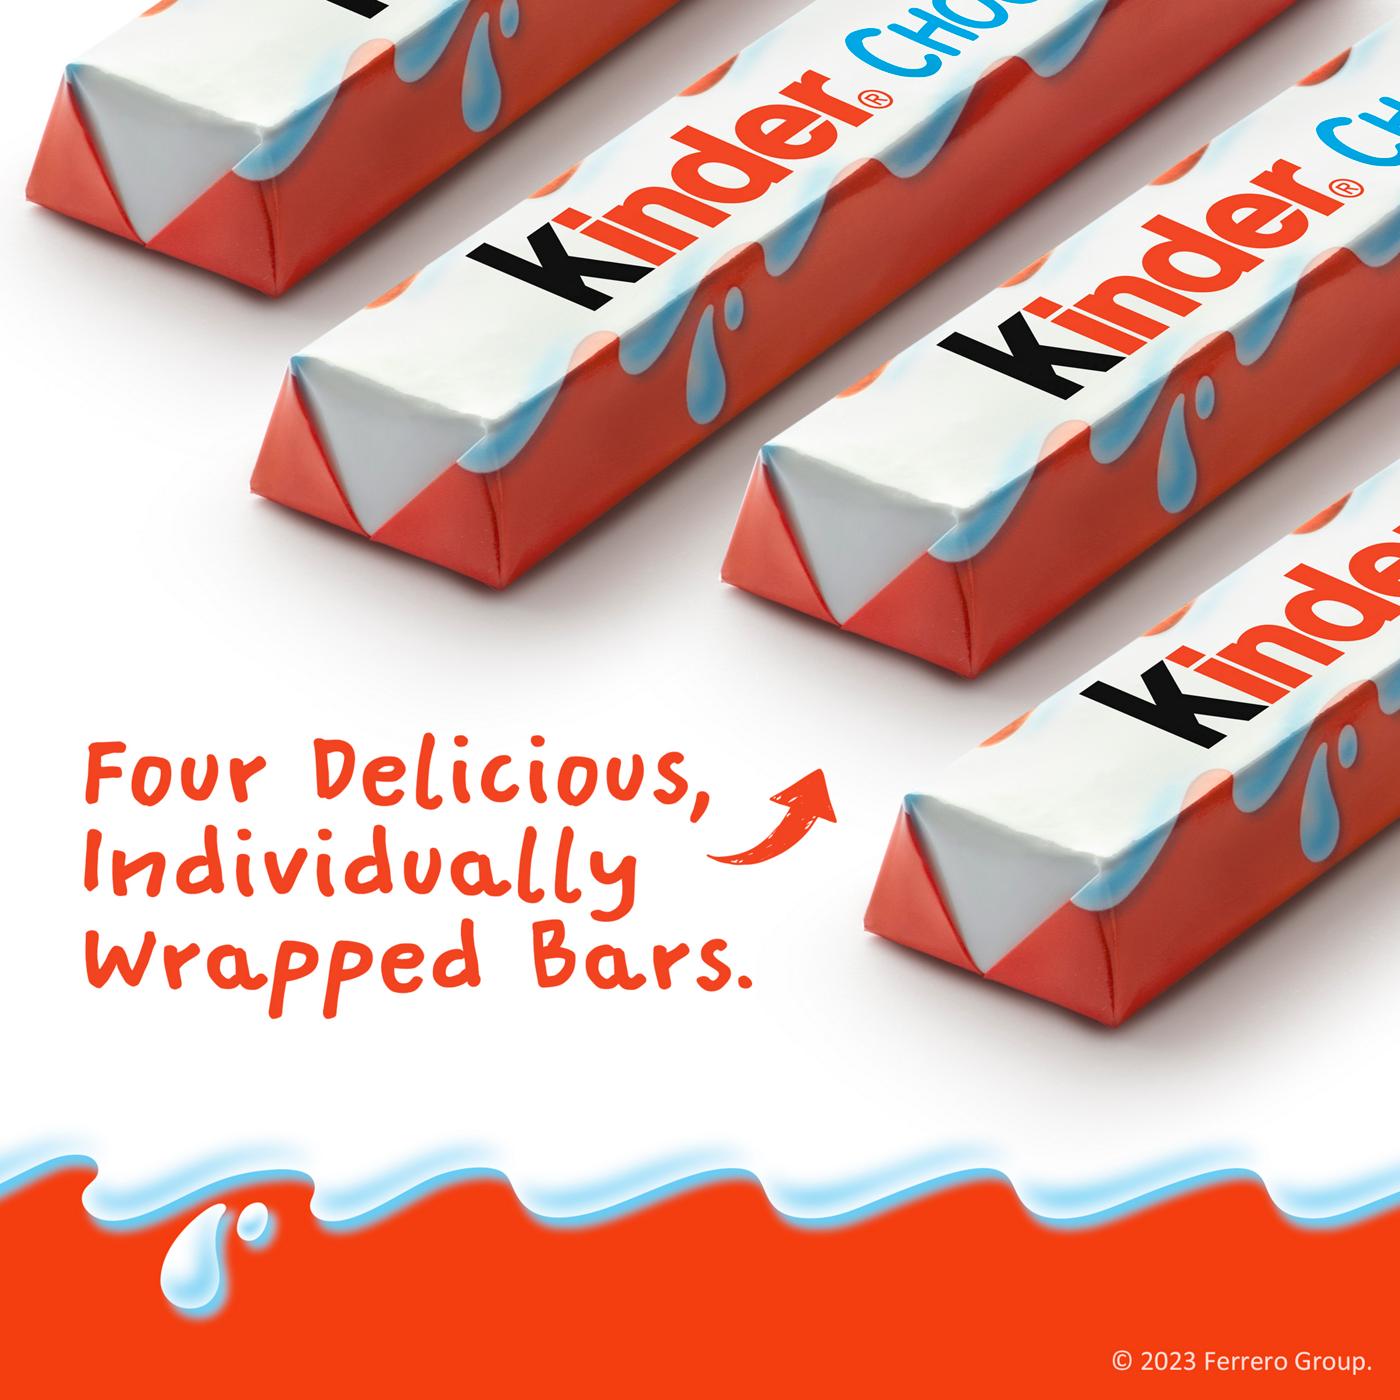 Kinder Chocolate with Creamy Milky Filling Candy Bars; image 2 of 5